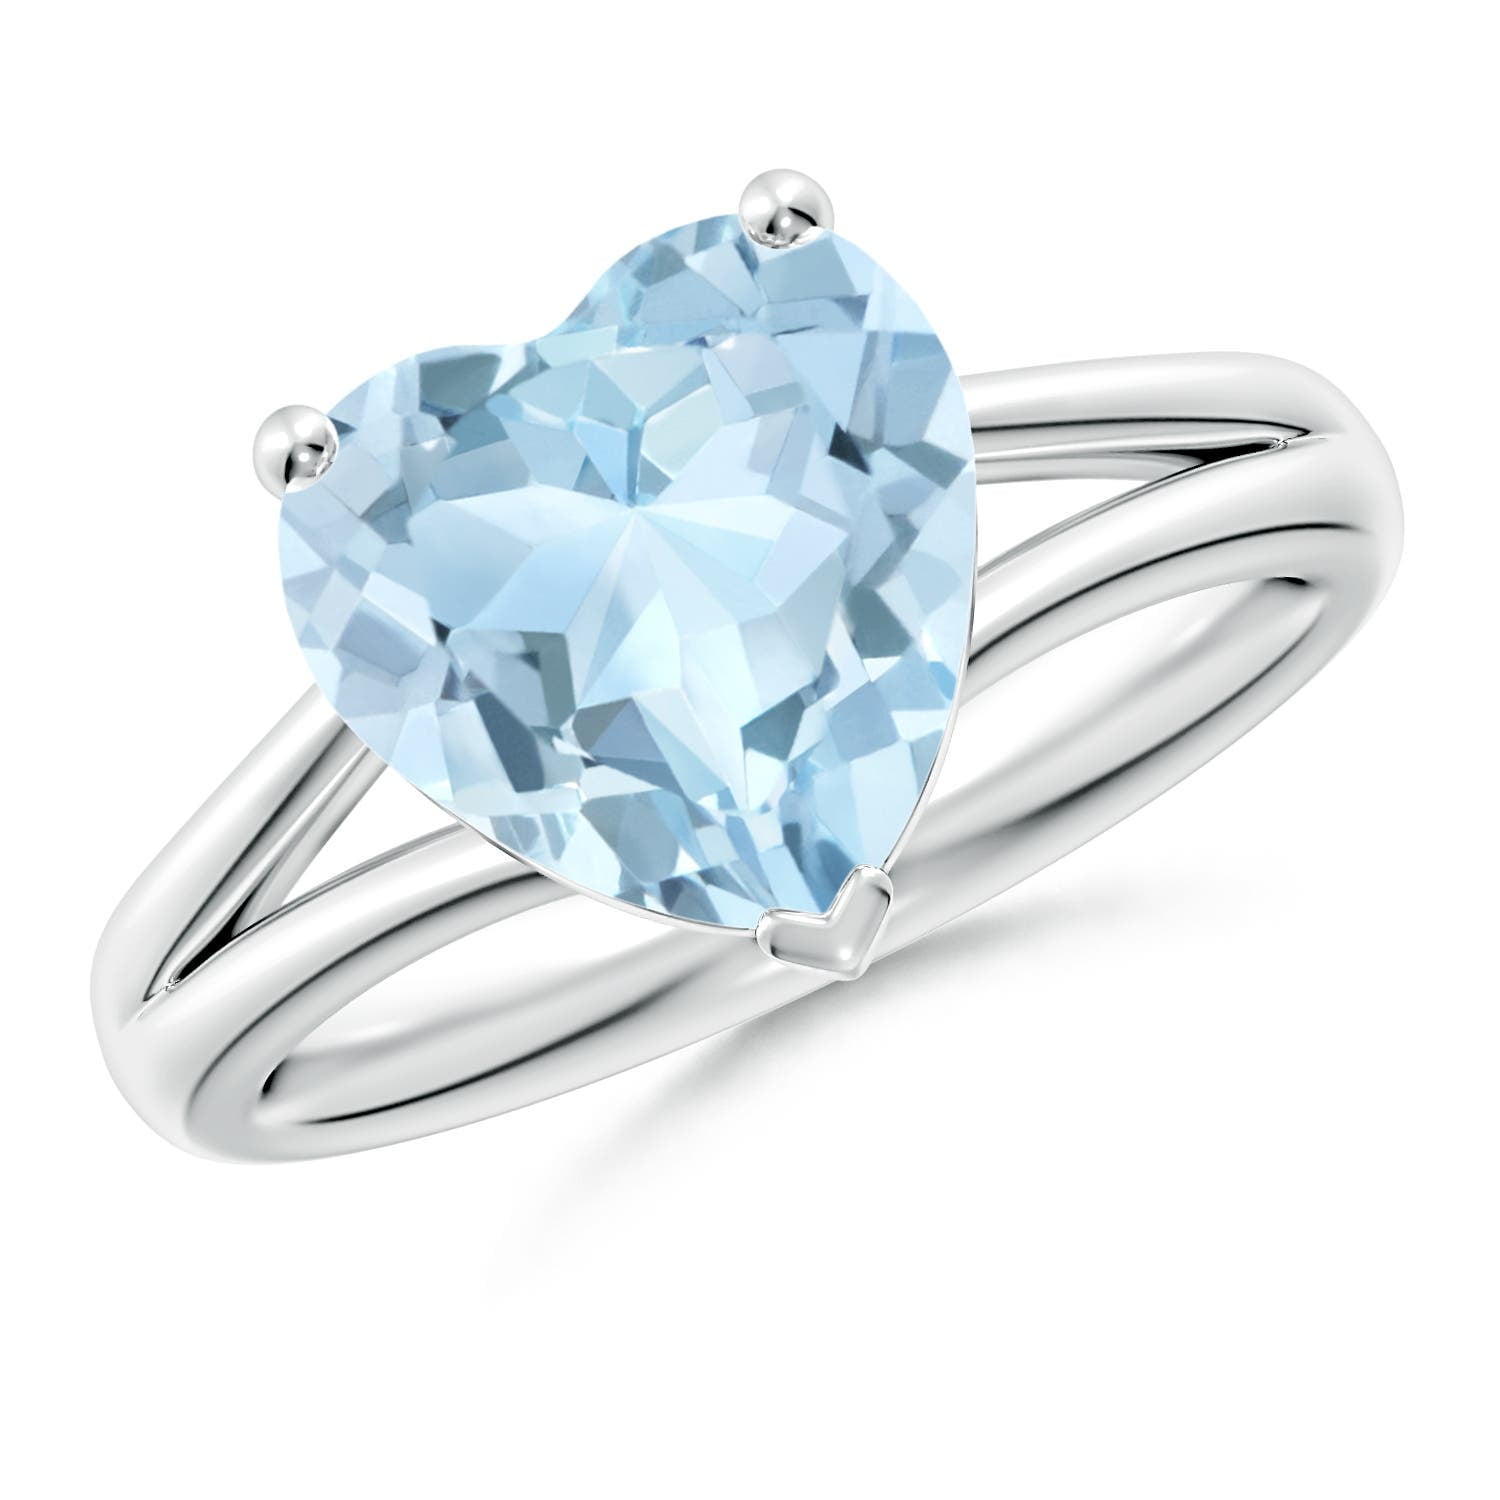 Angara Natural 2.52 Ct. Aquamarine Solitaire Ring in Sterling Silver ...